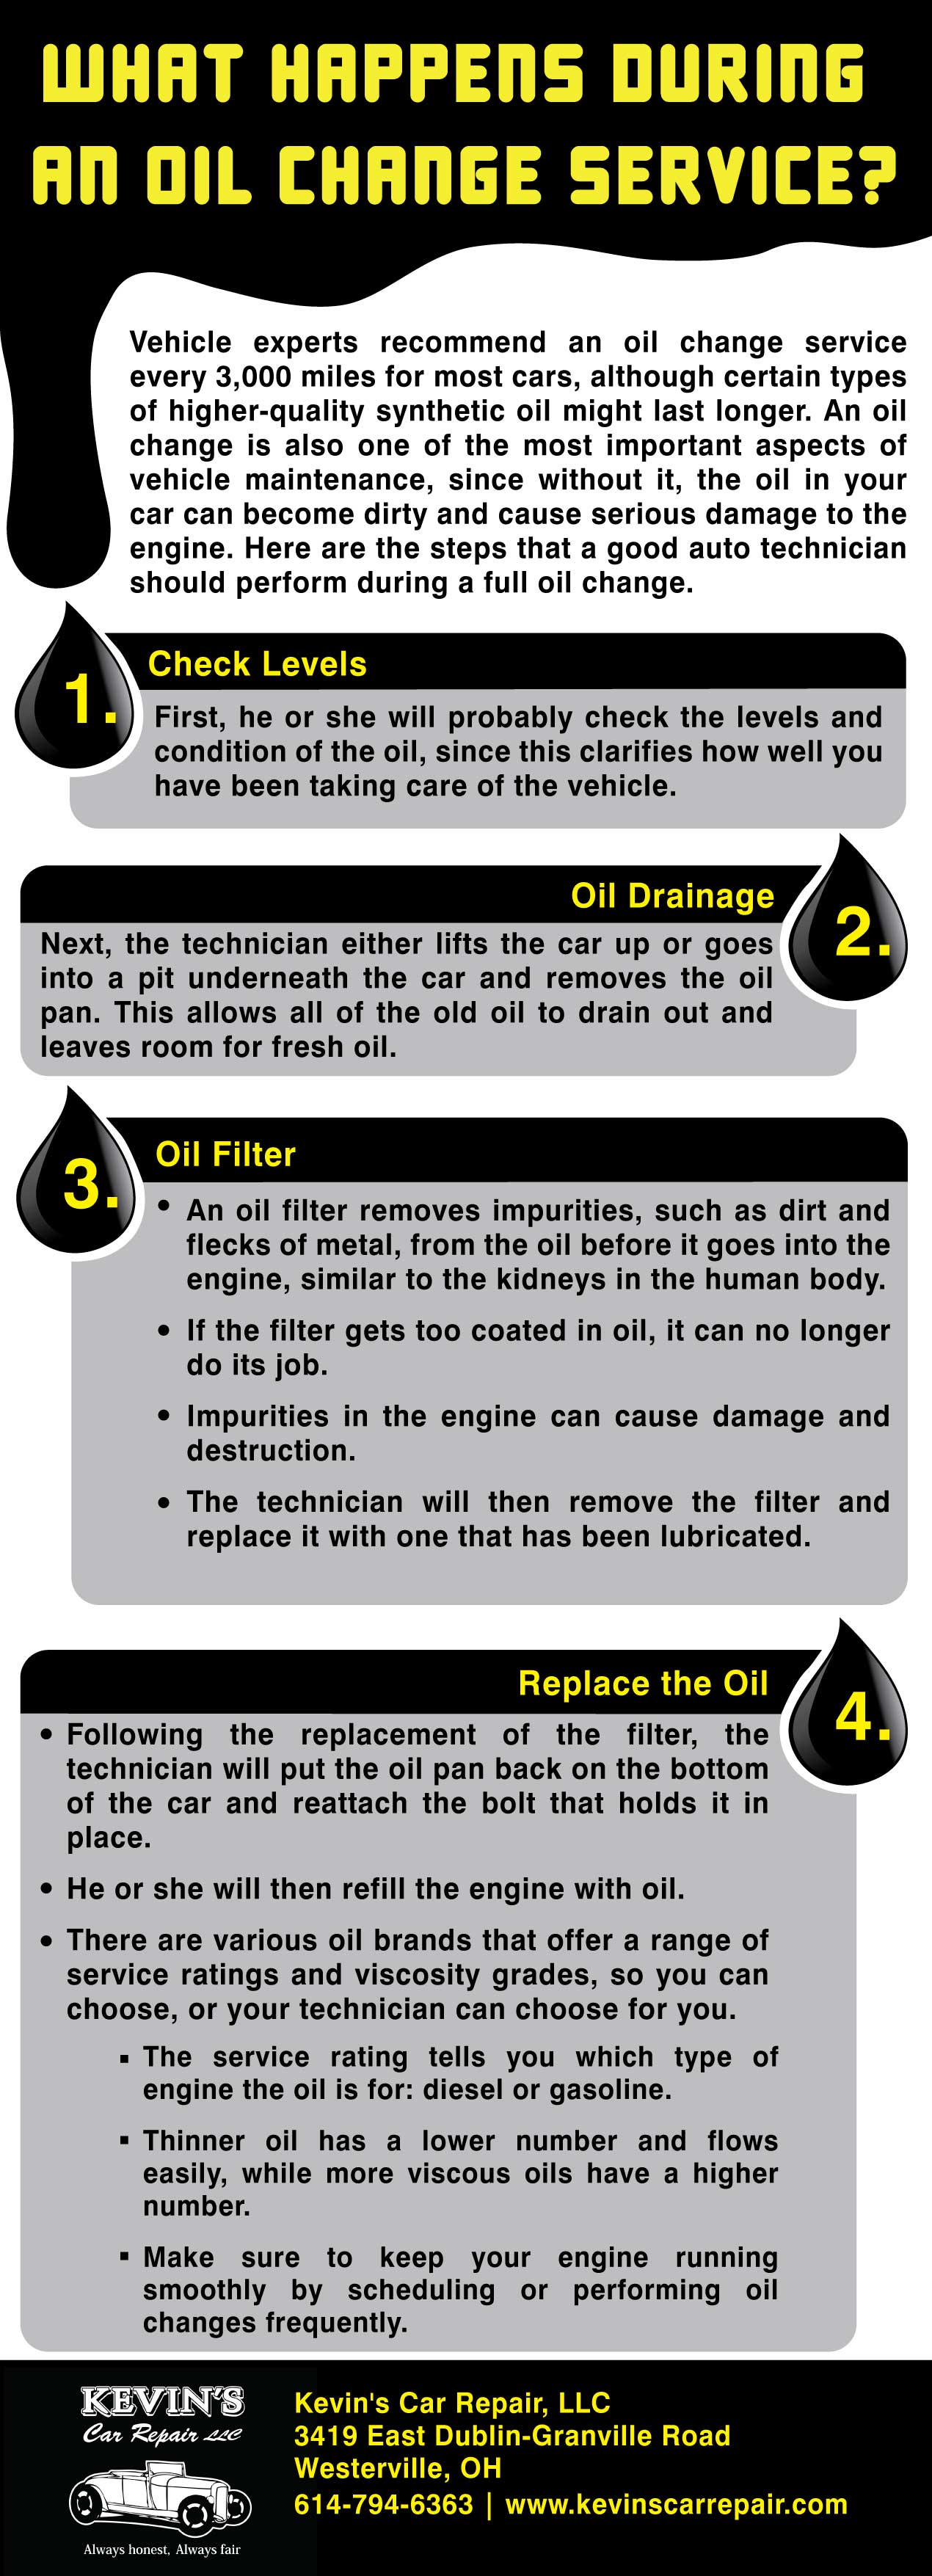 What Happens During an Oil Change Service?